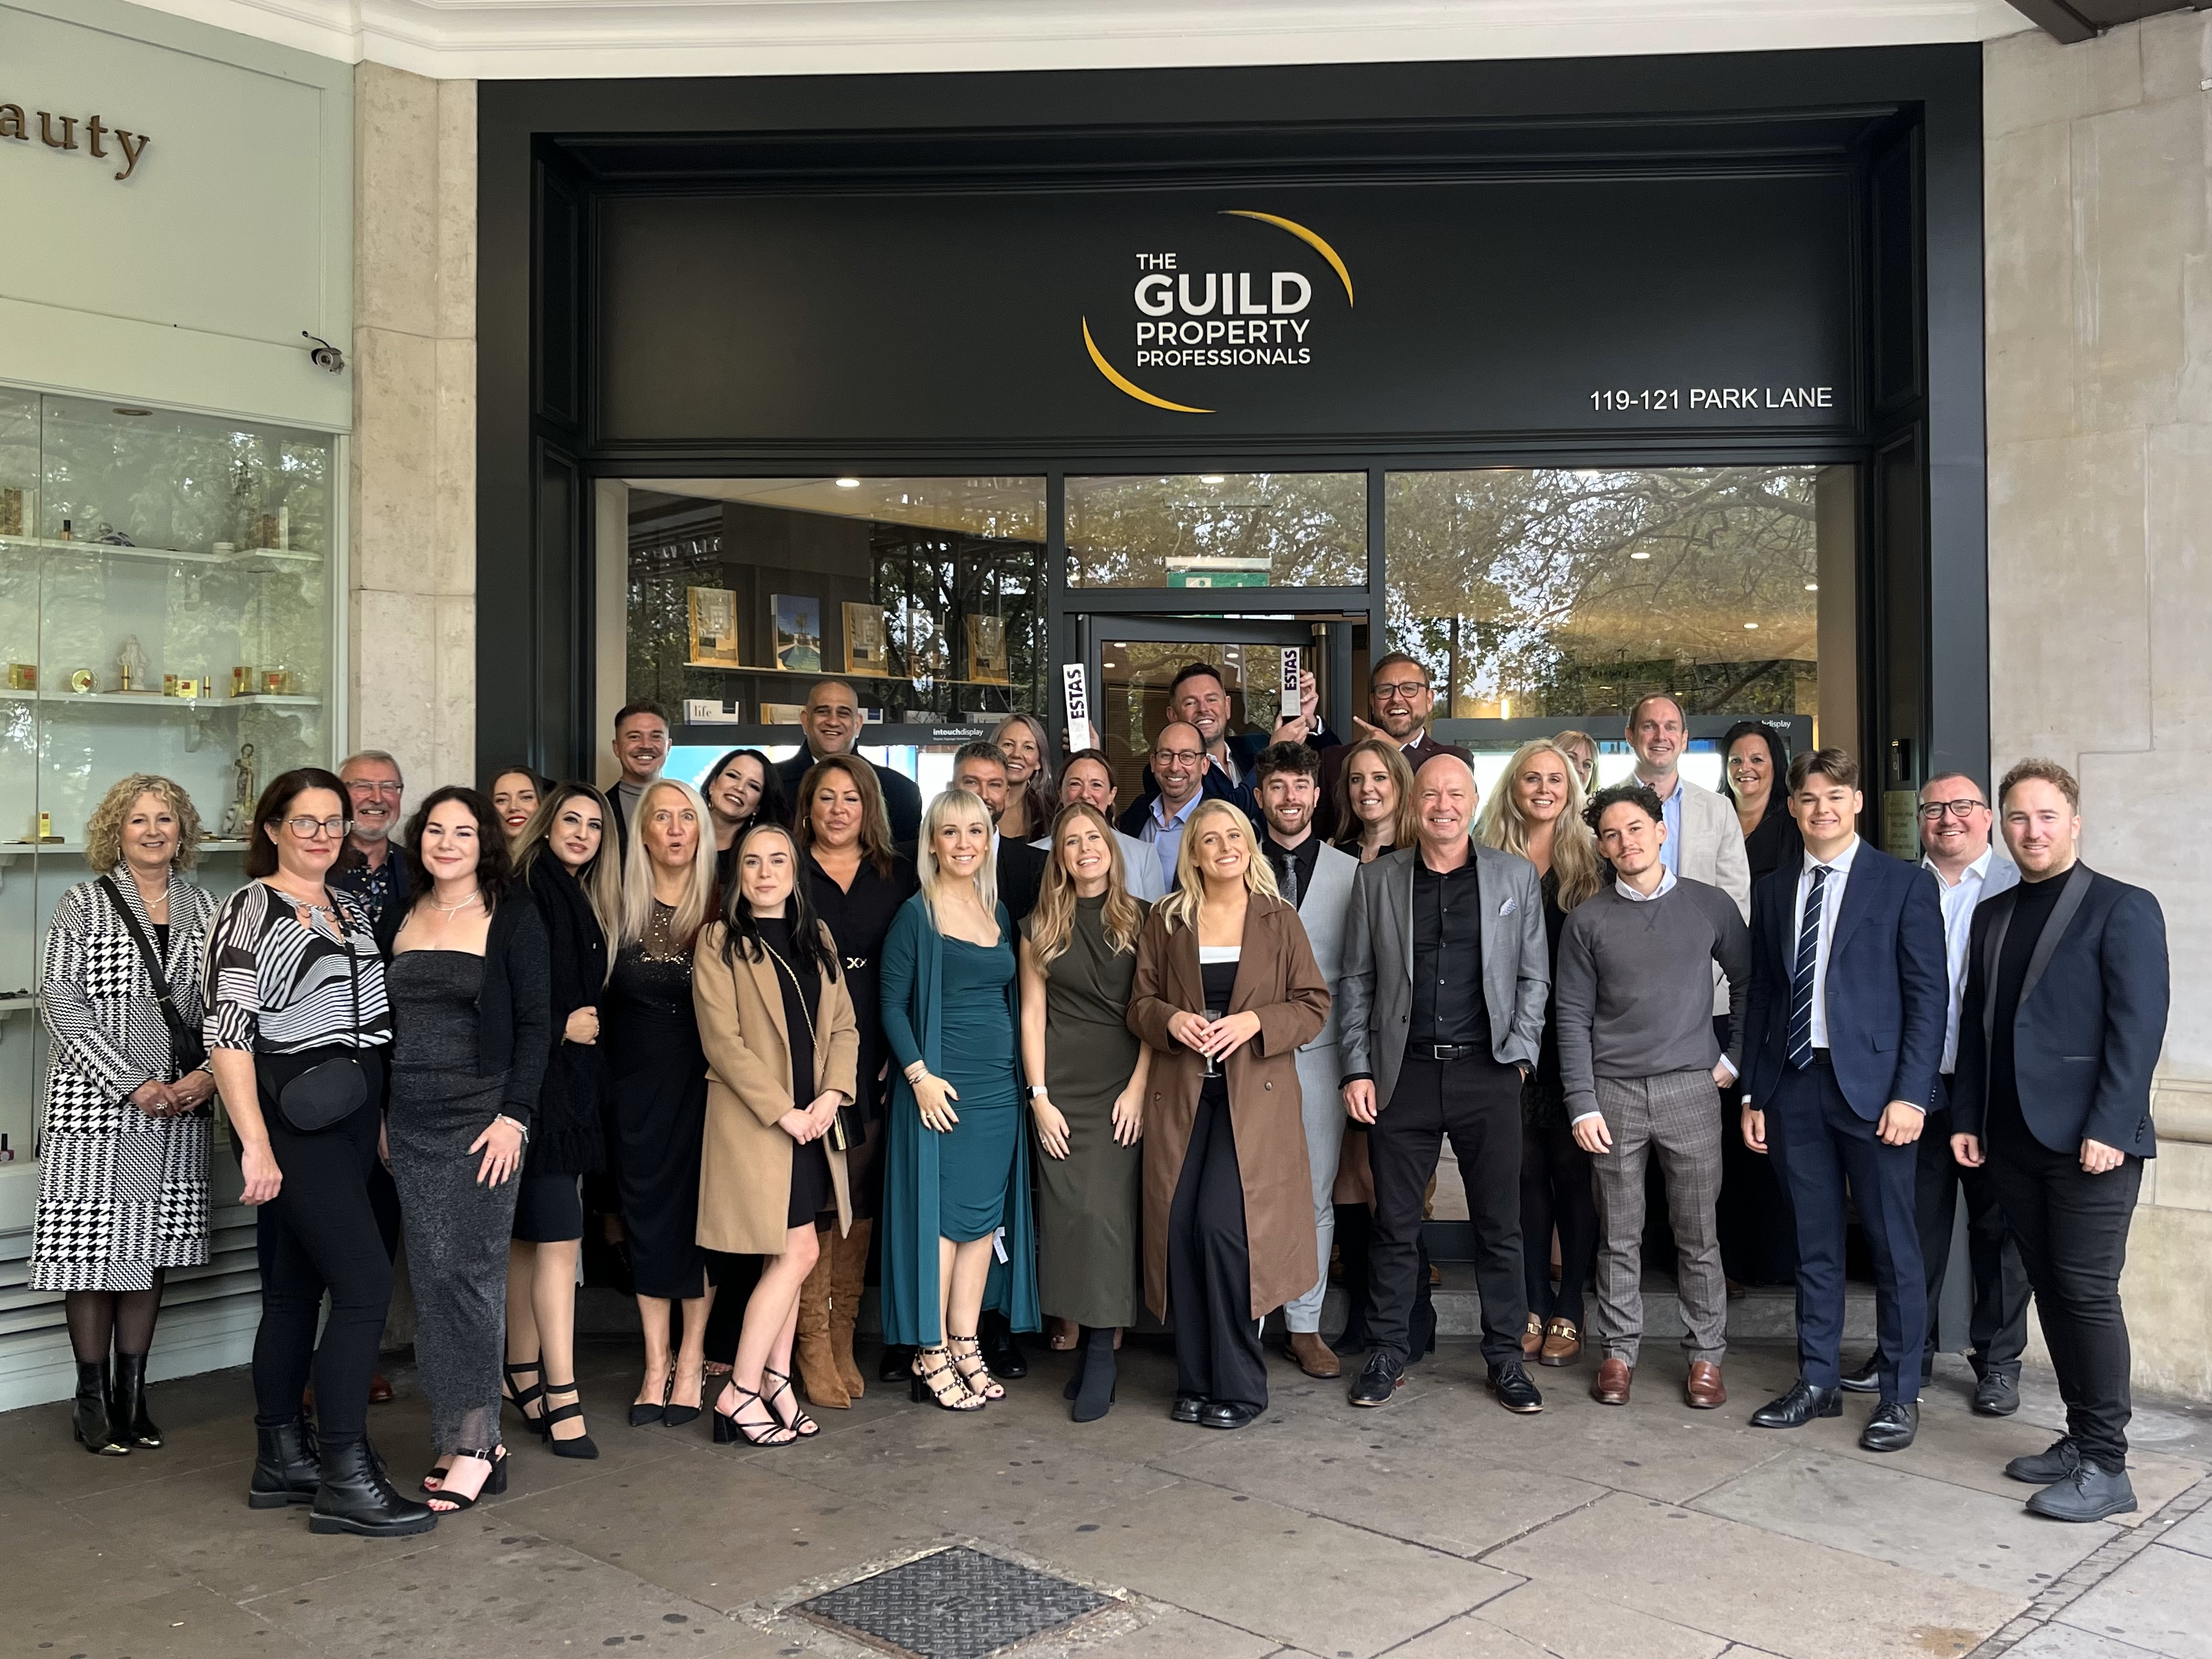 Guild Members on their way to the awards in London